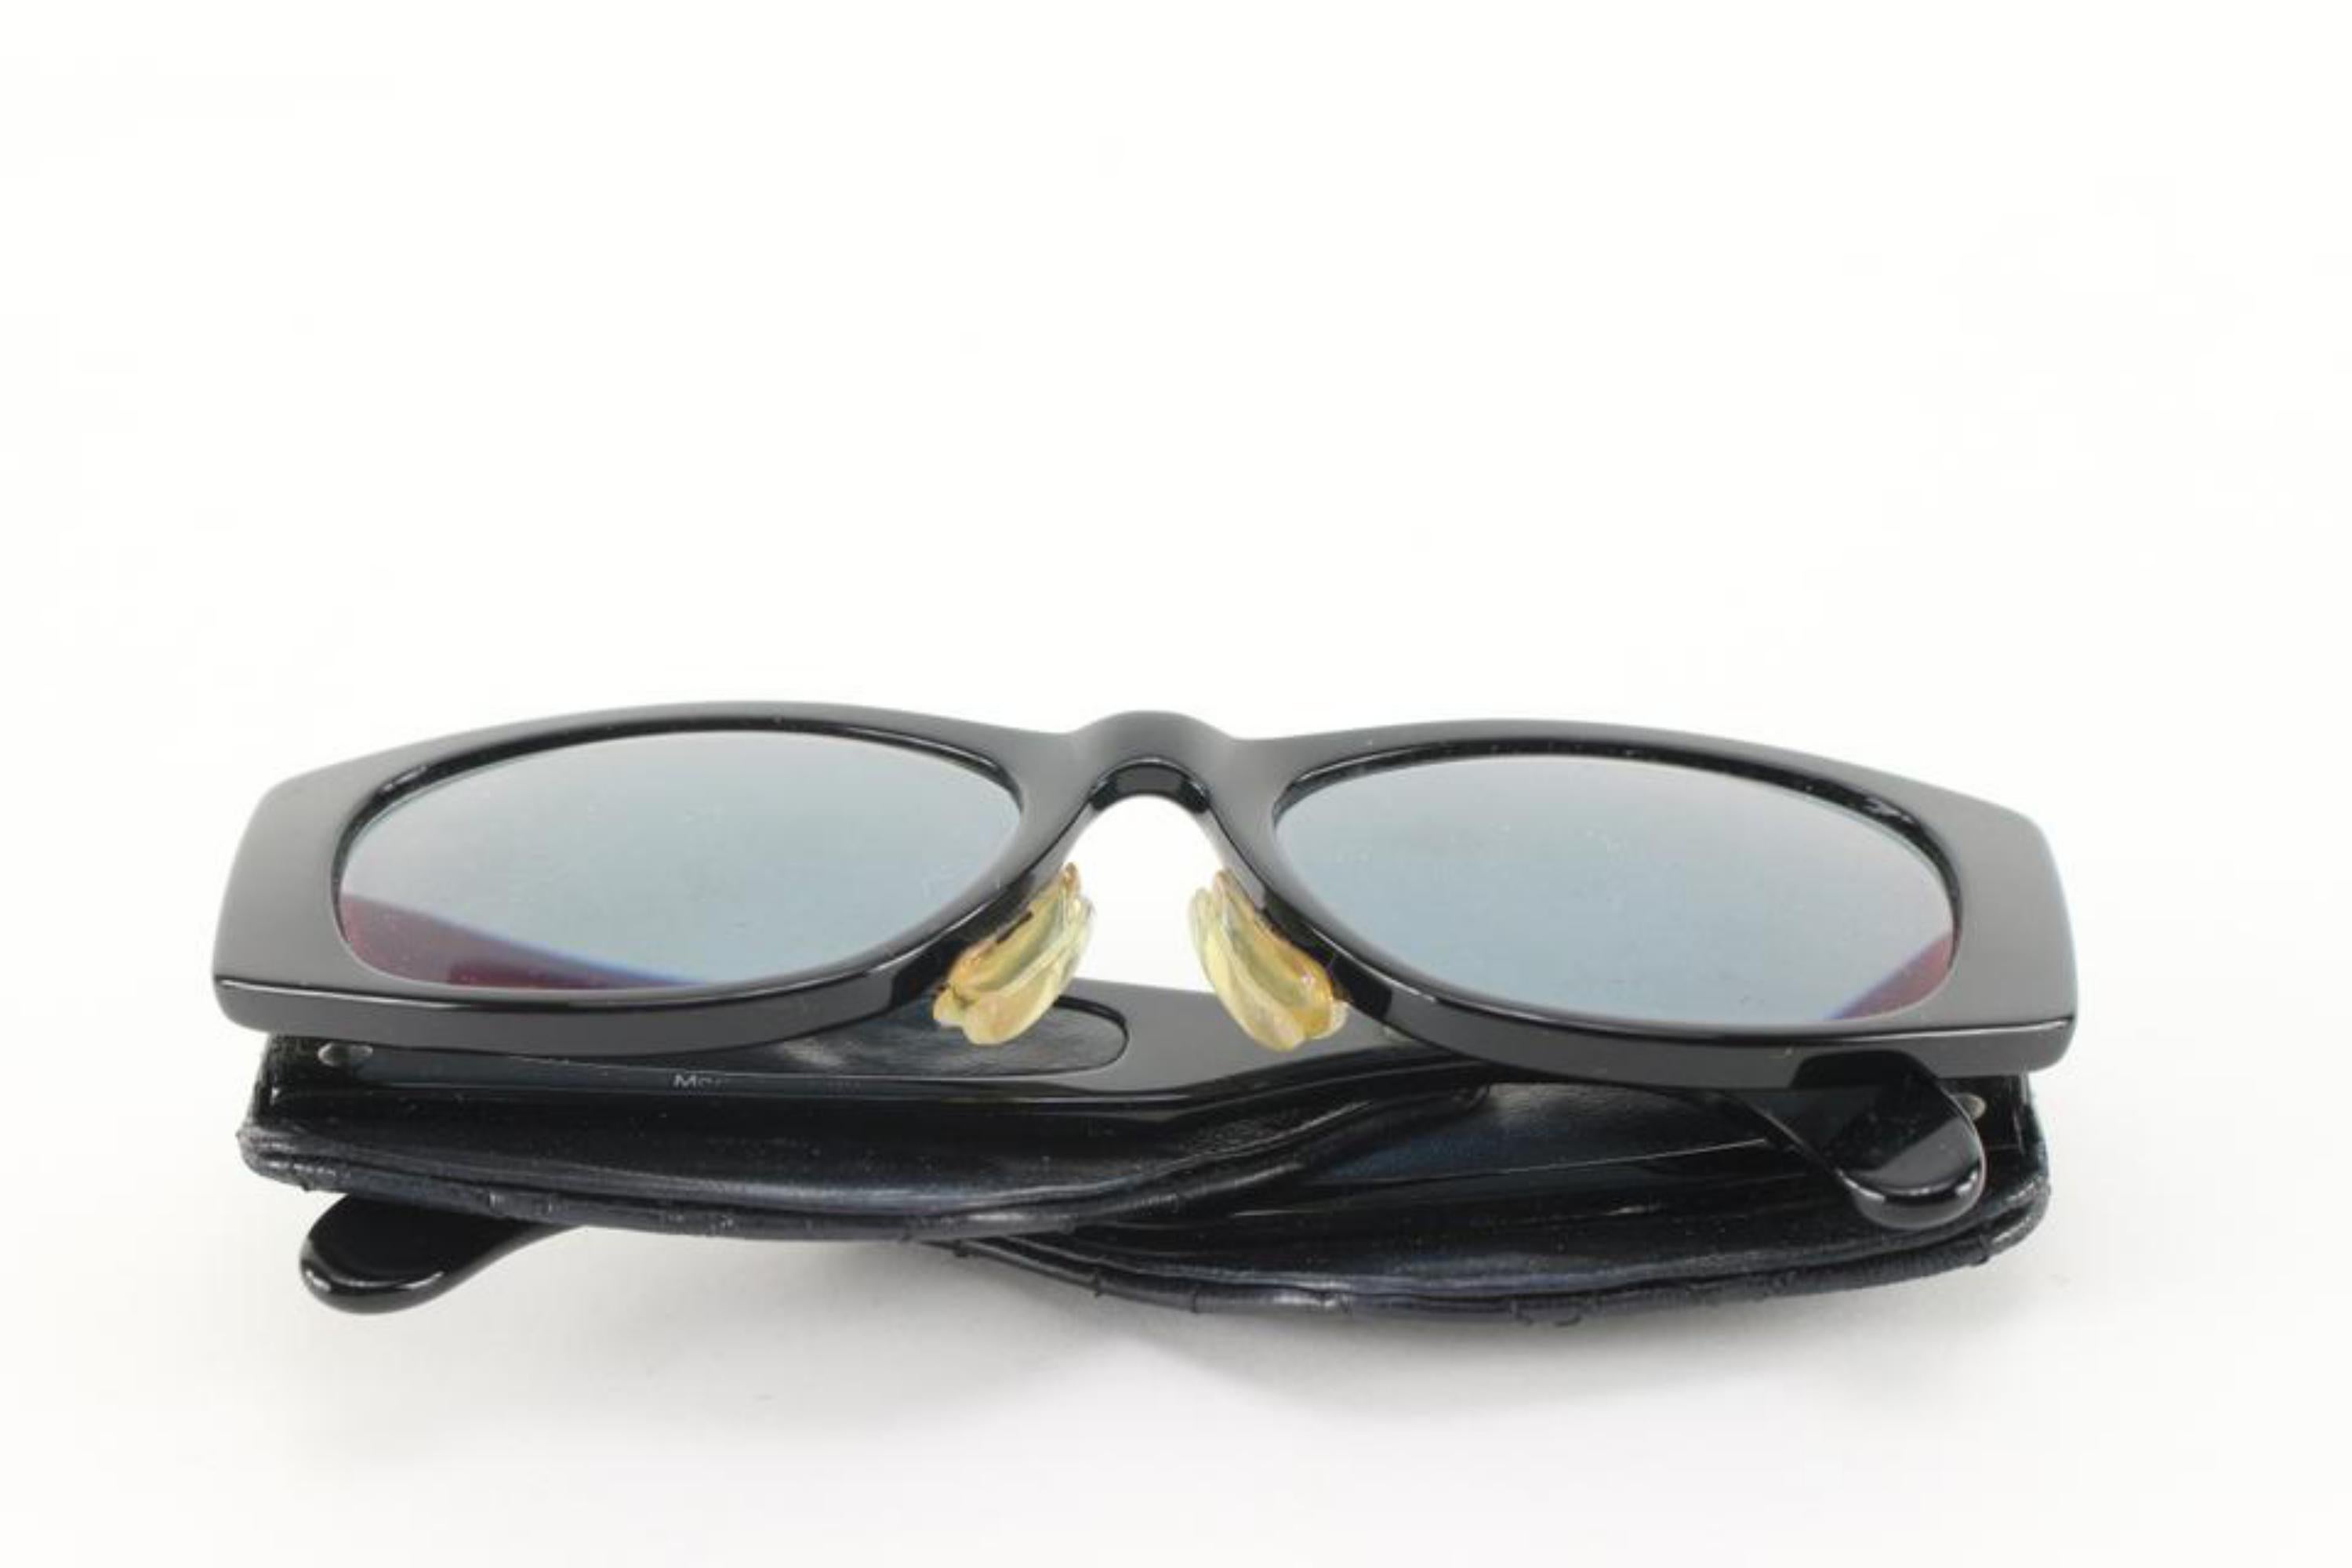 Chanel Rare Vintage Black Quilted Lambskin 1988 Sunglasses 1cz822s 4